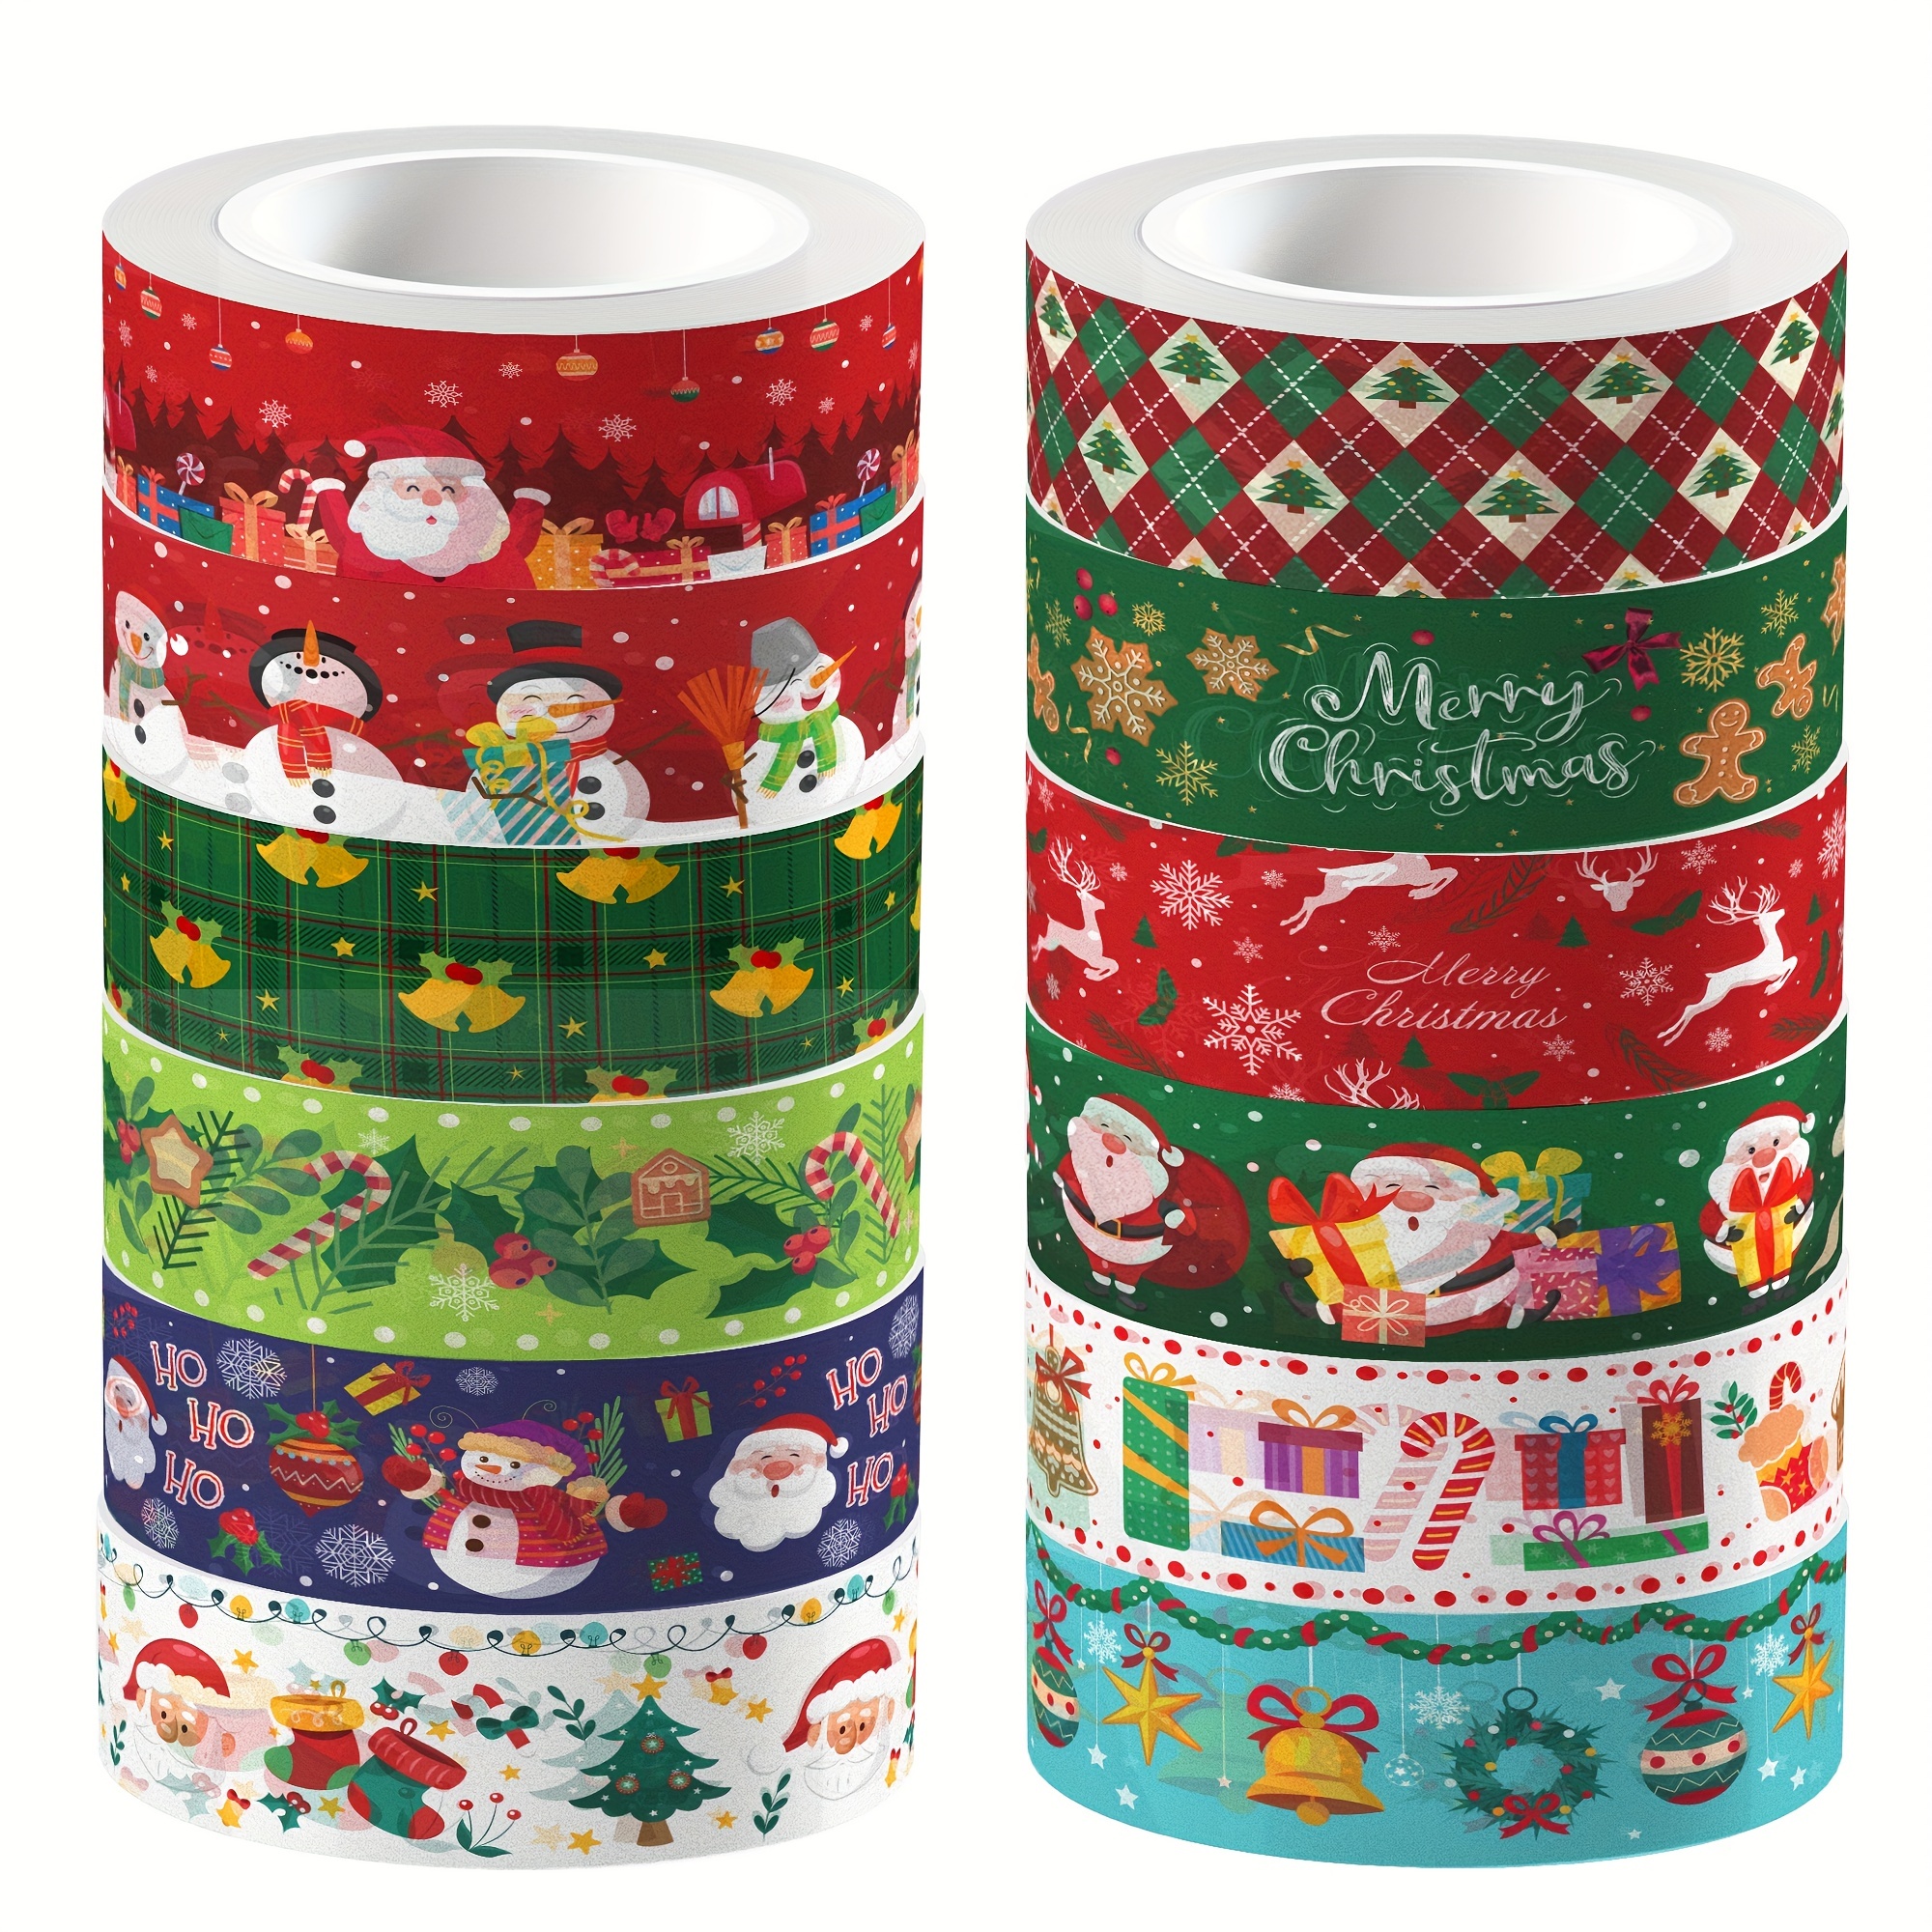 Christmas Washi Tape Set 12 Rolls Winter Embellishment for Arts, DIY Crafts, Journals, Planners, Wrapping, Other